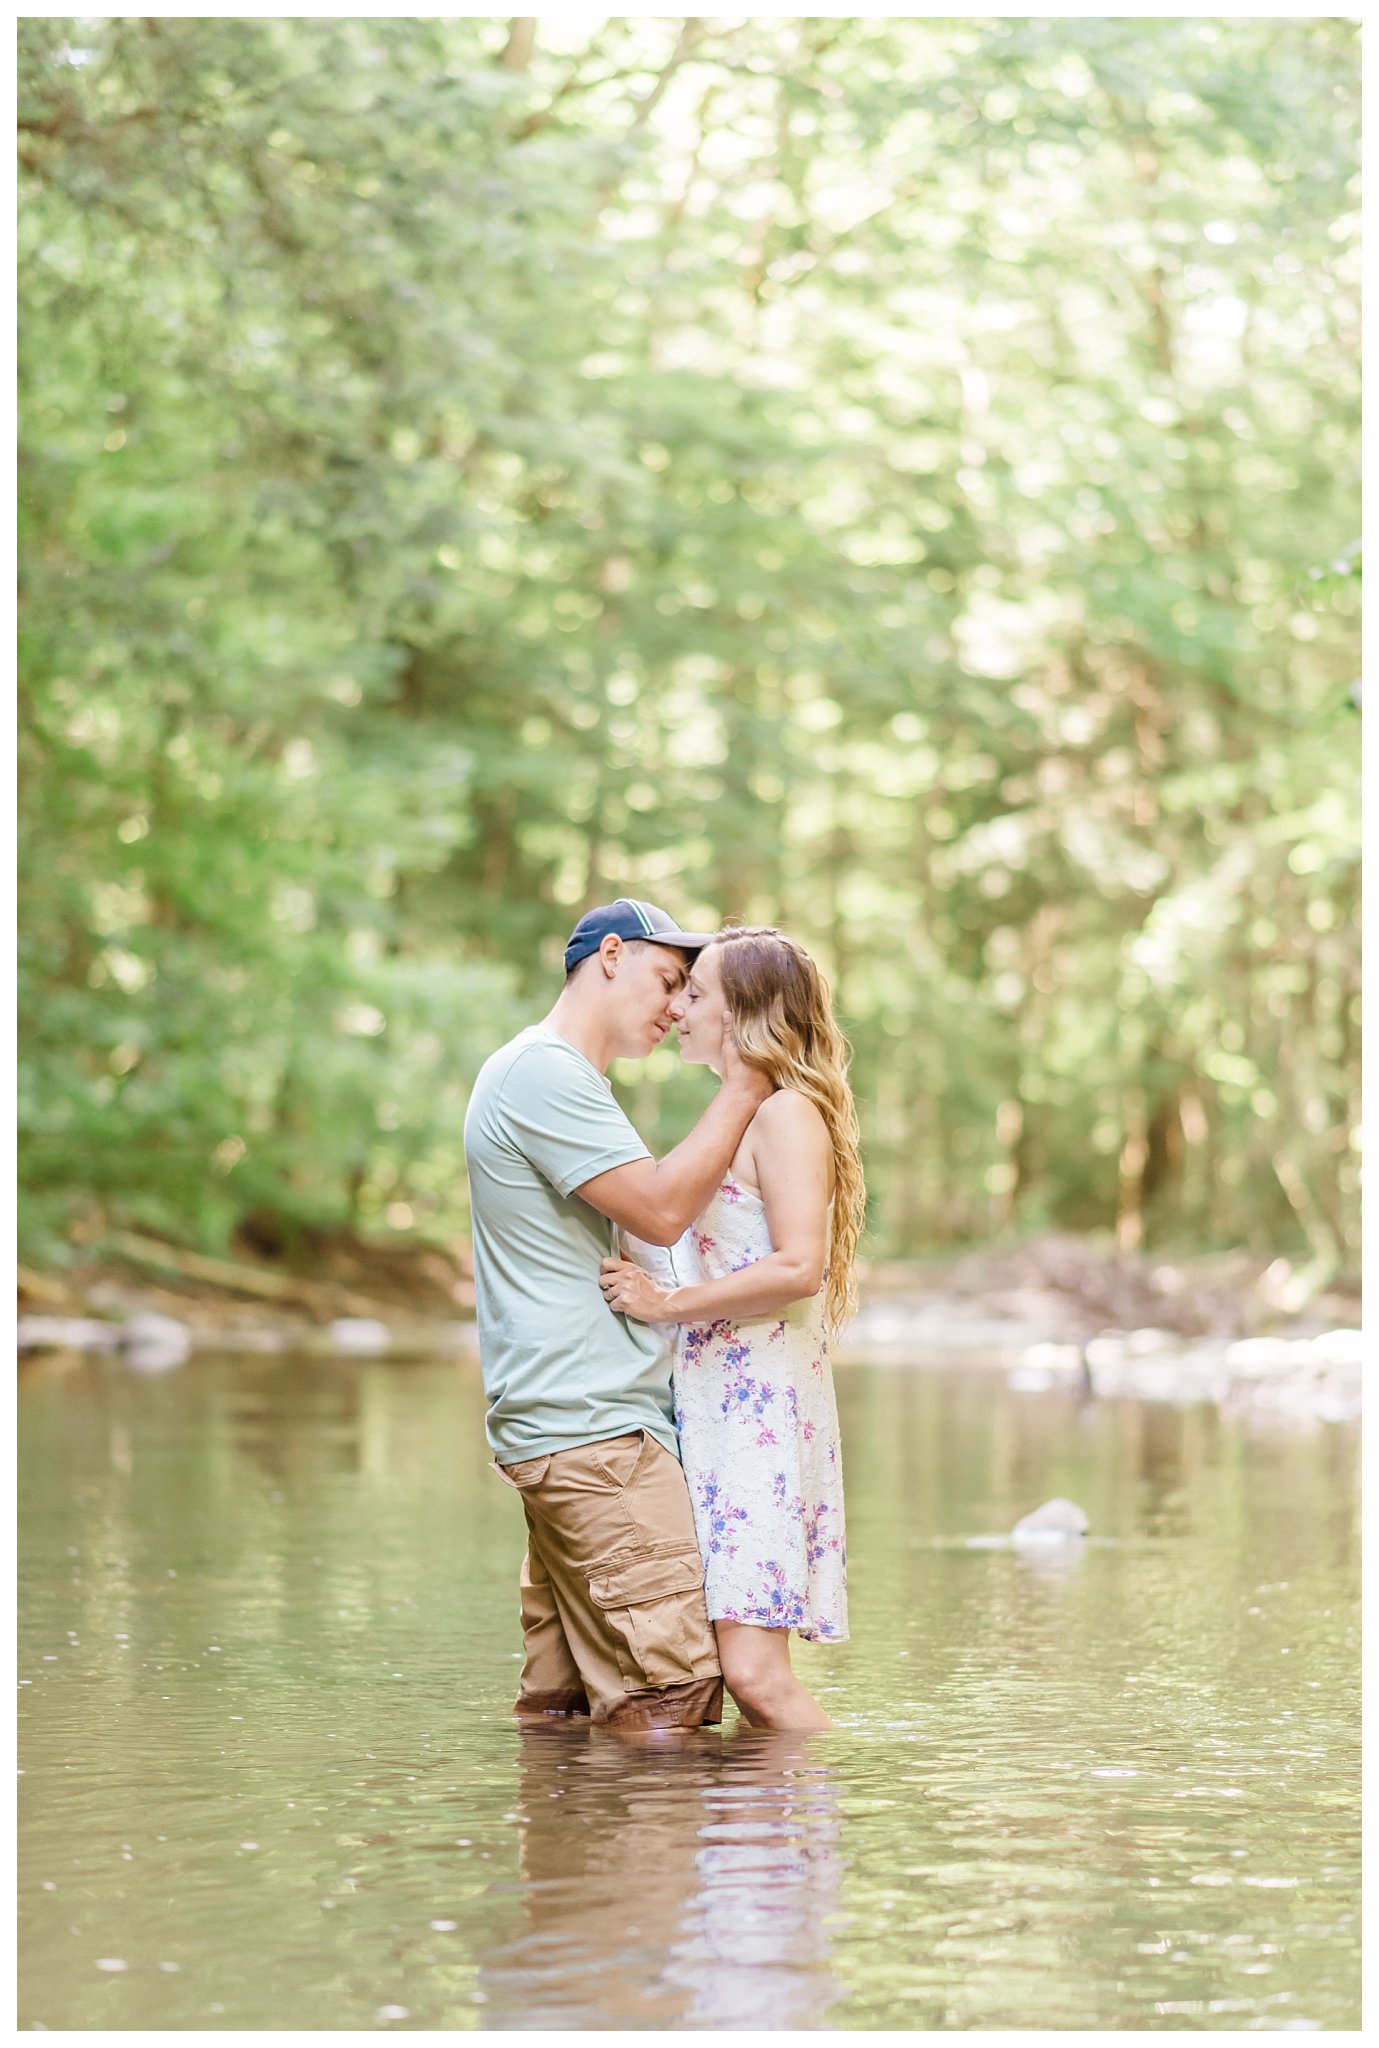 Joanna Young Photography Elizabeth and Cody Engagement Session_0007.jpg